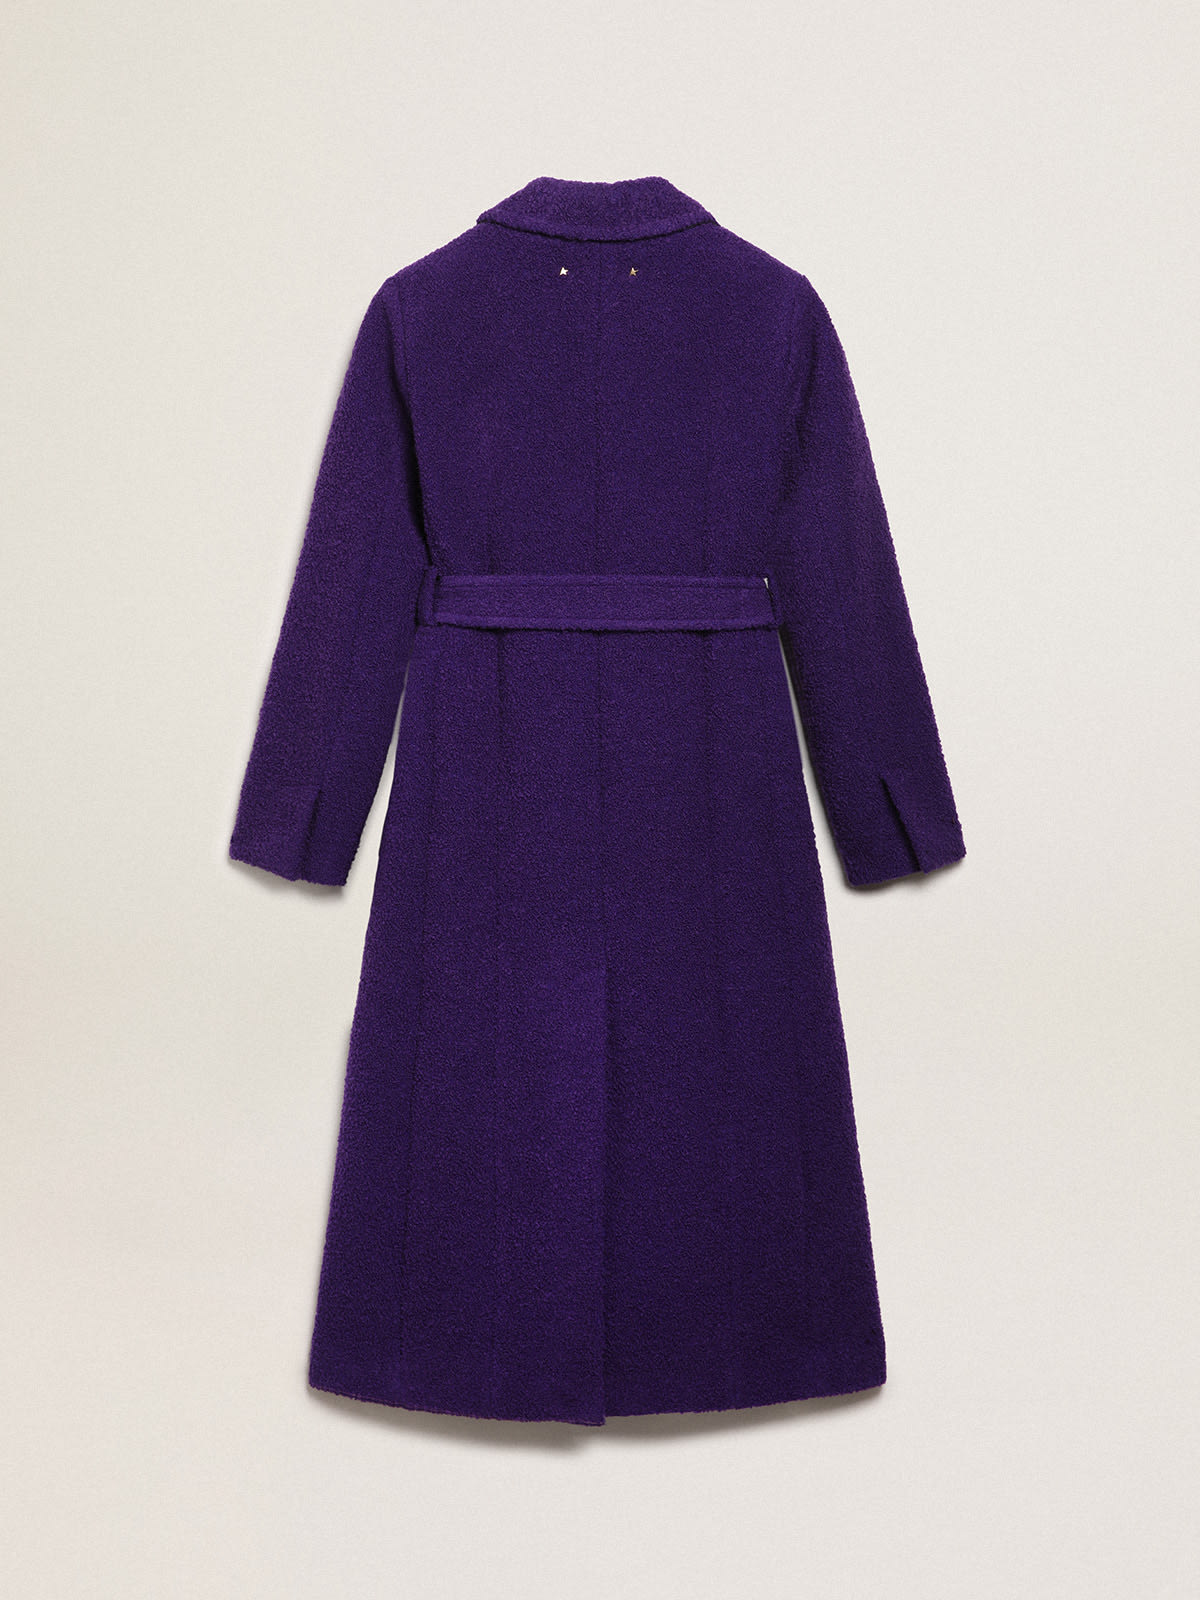 Golden Goose - Journey Collection coat in indigo purple wool with inner lining in drawn print in 